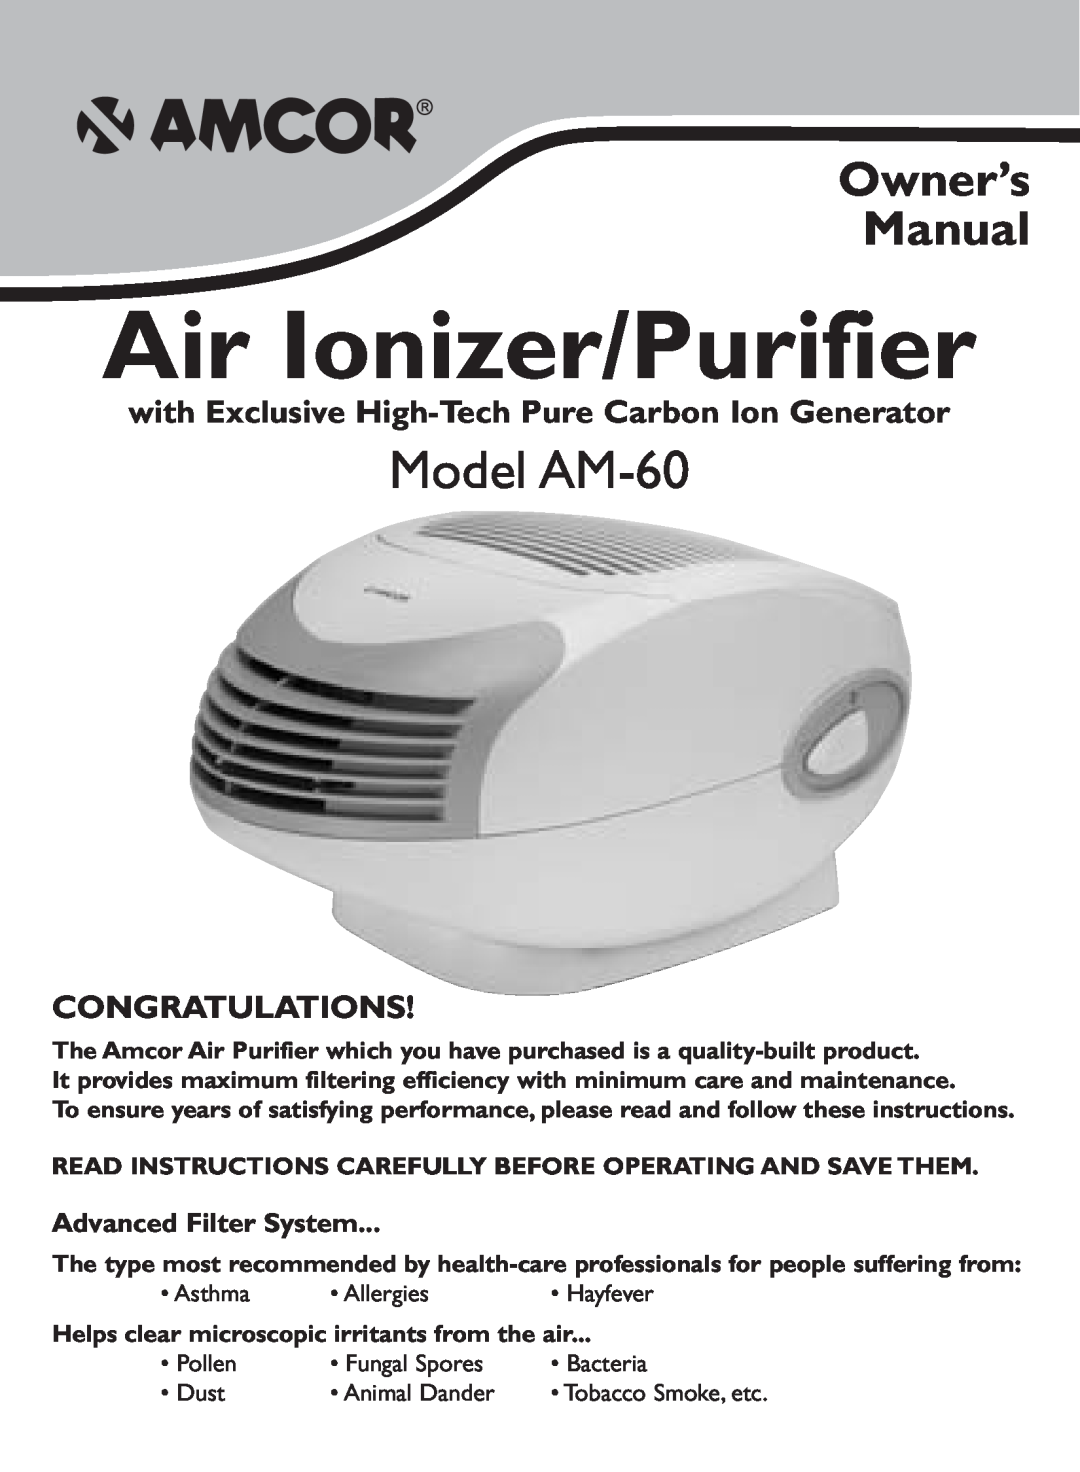 Amcor AM-60 owner manual with Exclusive High-TechPure Carbon Ion Generator, Congratulations, Air Ionizer/Purifier 